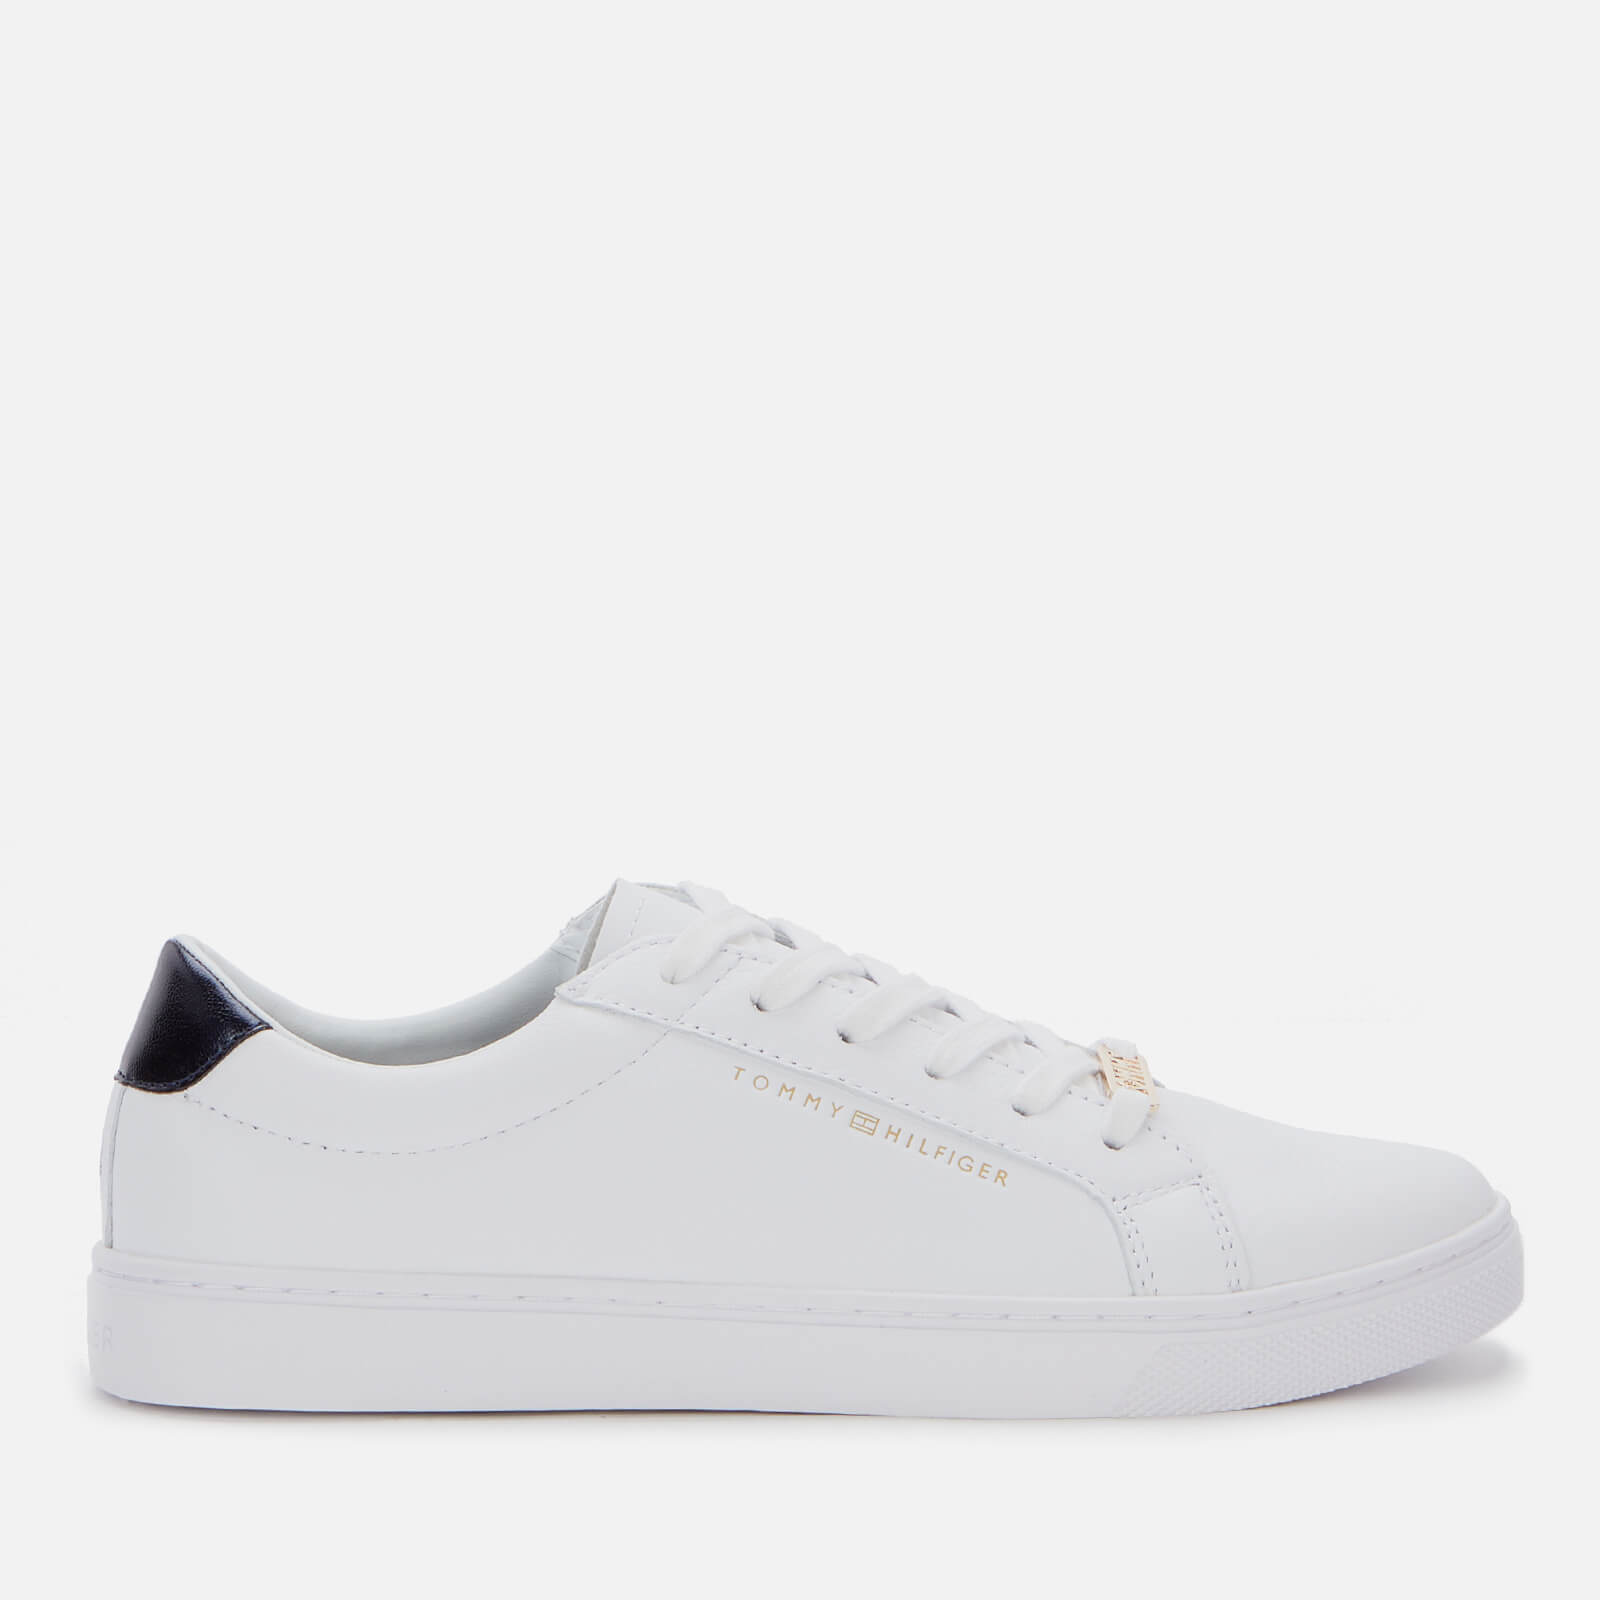 Tommy Hilfiger Women's Venus Leather Essential Trainers - White - UK 4